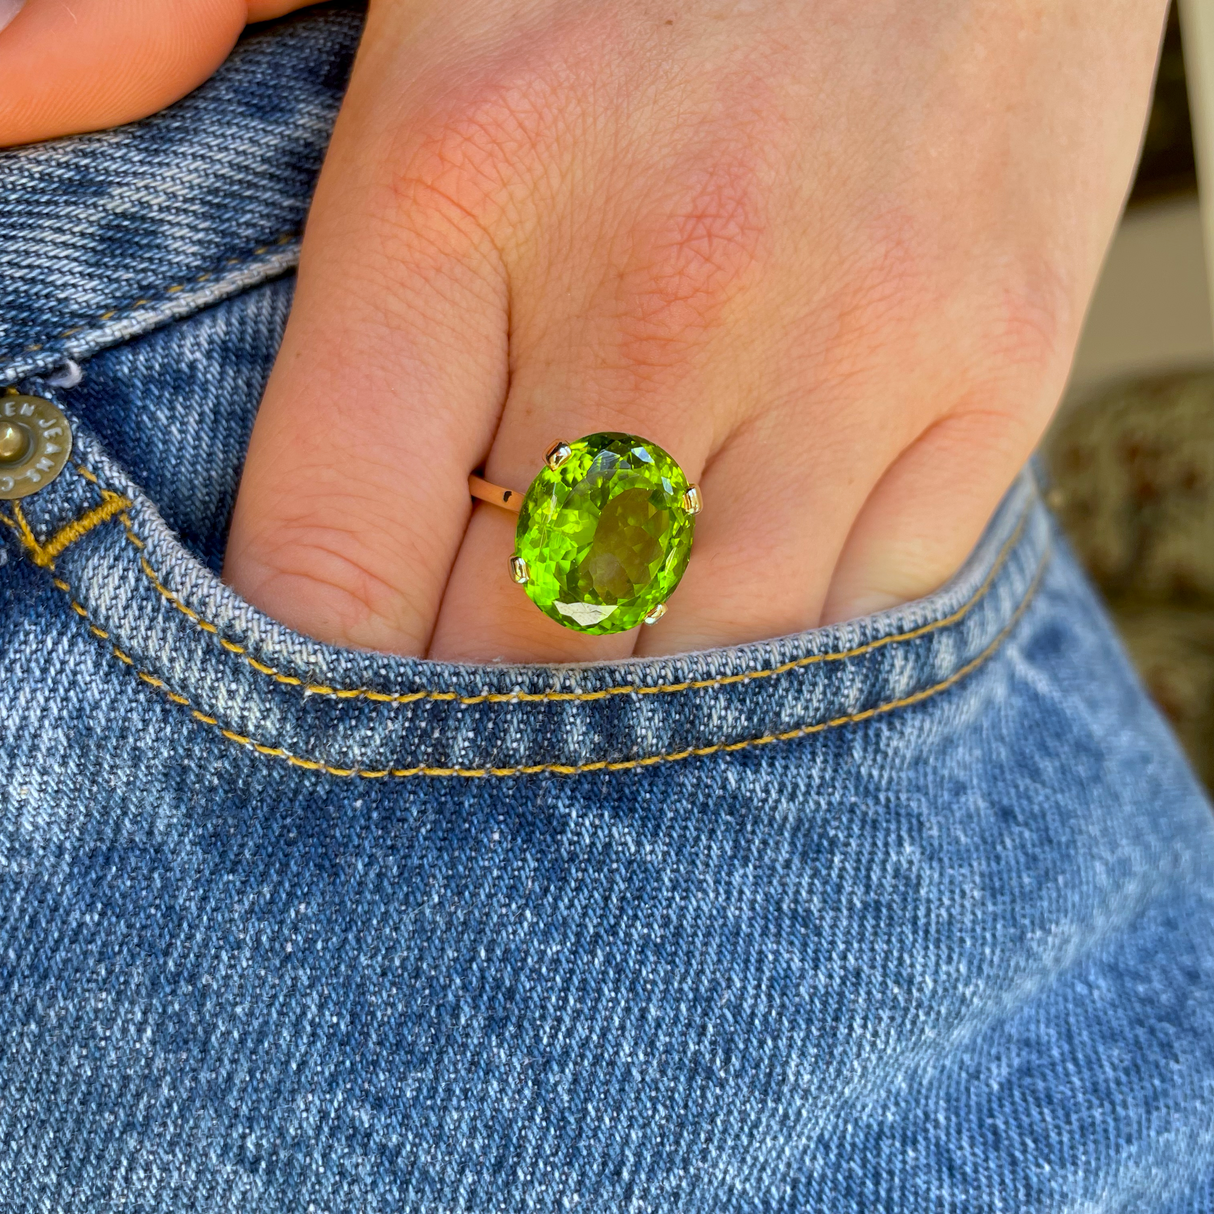 French | A Large Oval 12ct Peridot Ring, 18ct Gold